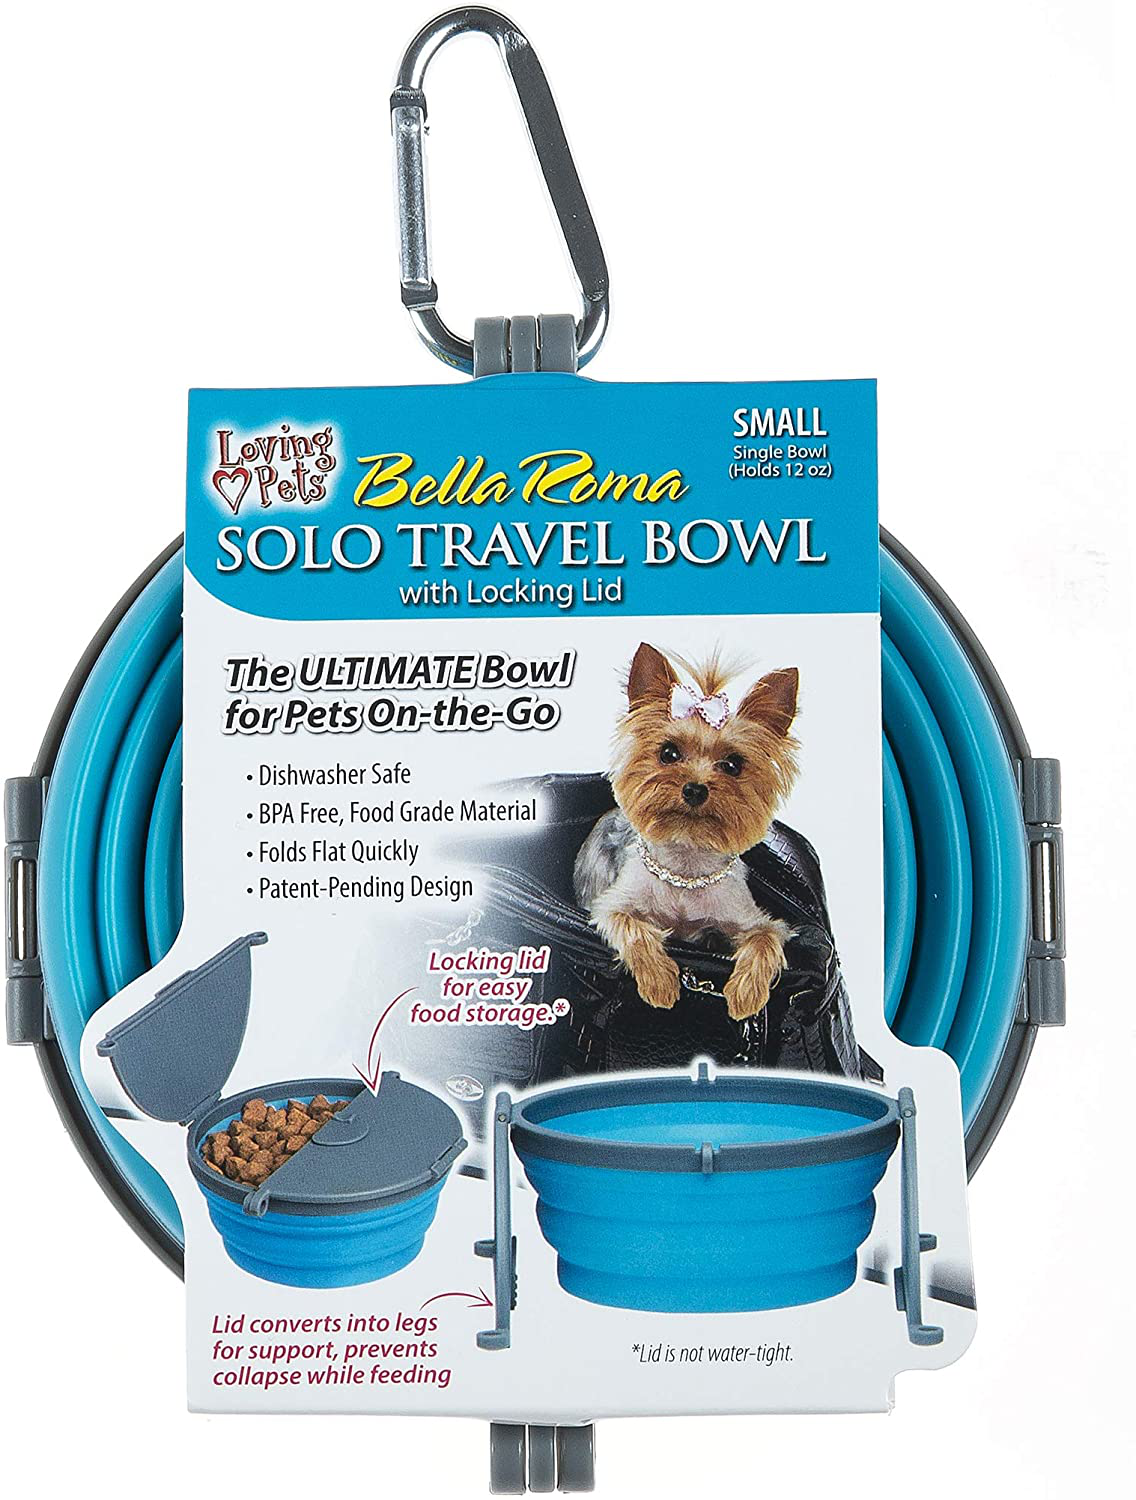 Loving Pets Bella Roma Travel Bowl for Dogs